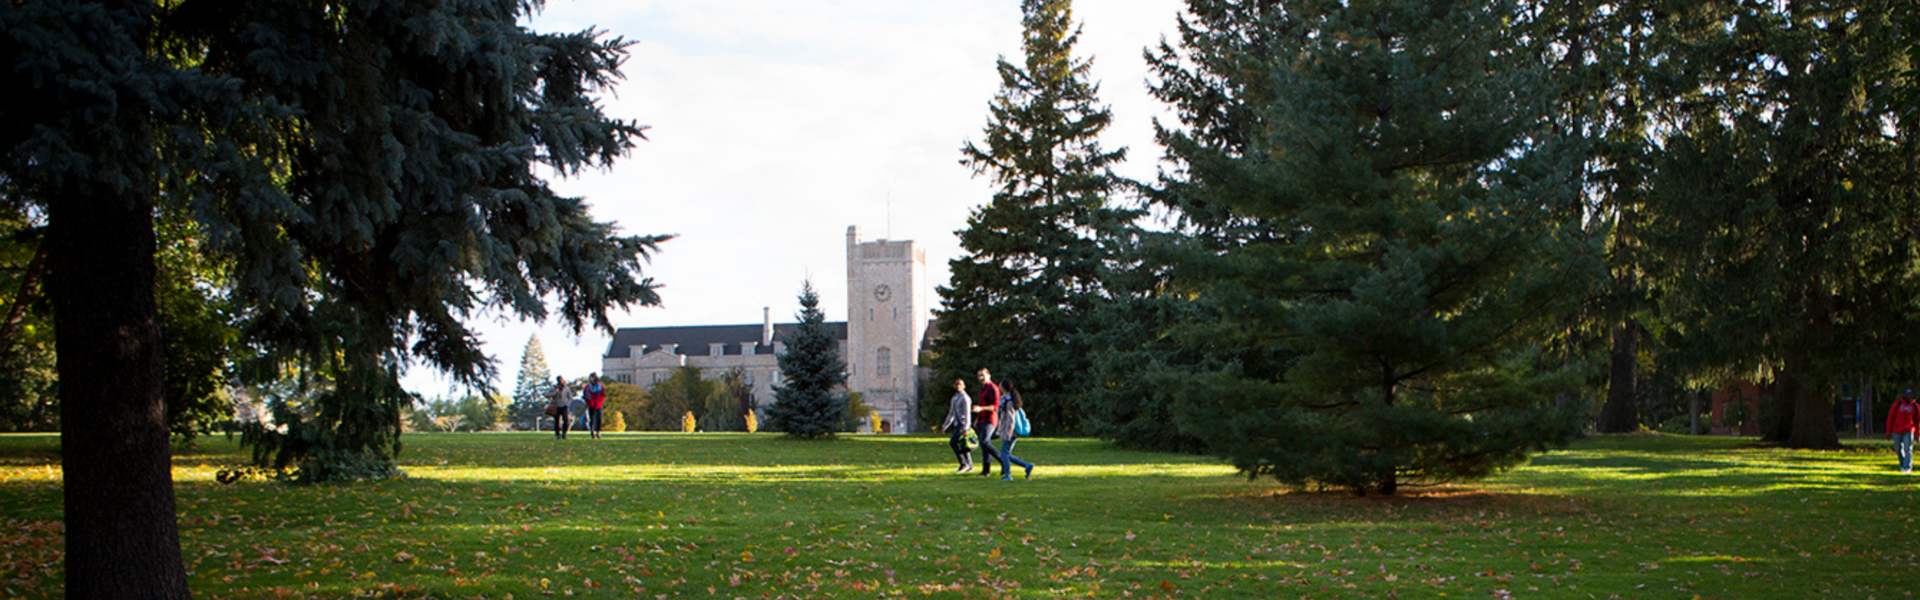 Students walk across Johnston Green on a sunny day, with Johnston Hall in the background.